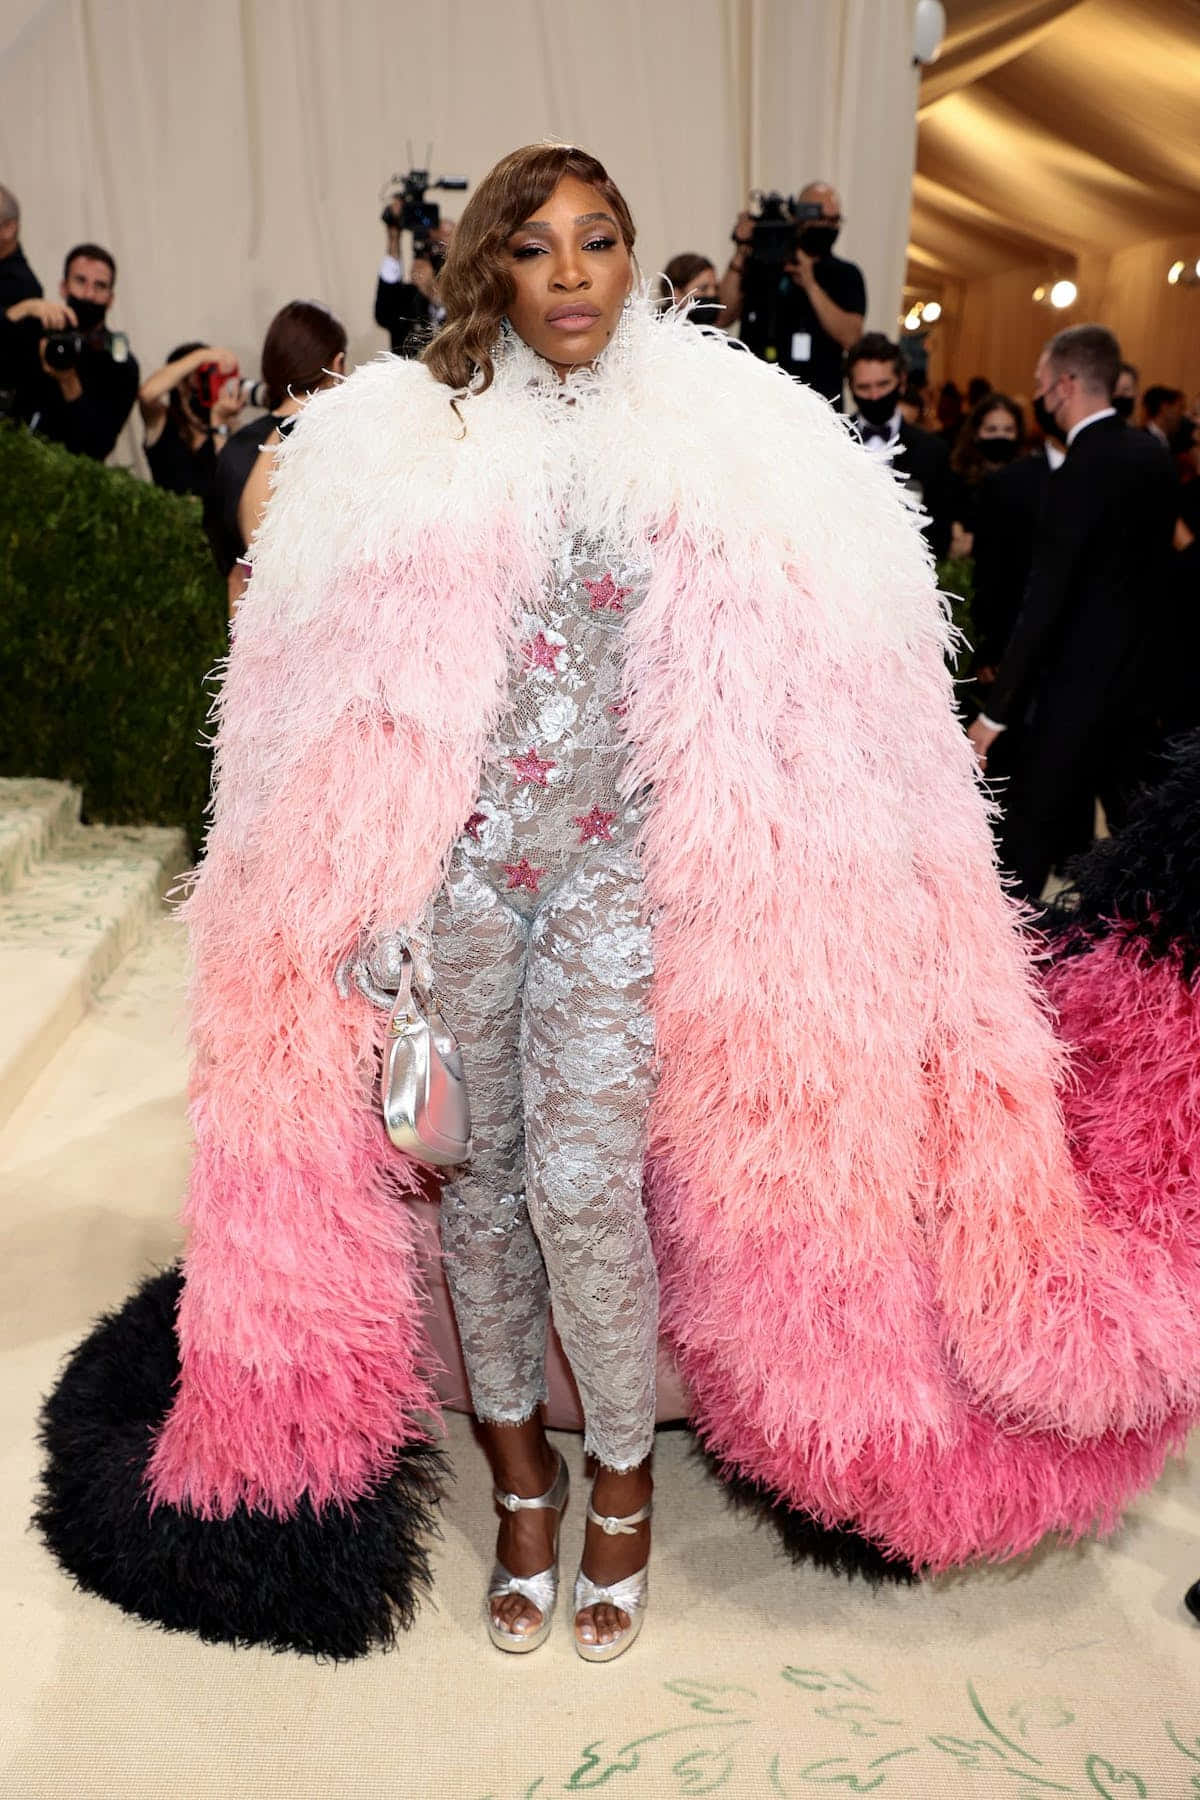 Anna Wintour welcomed attendees to the 2021 Met Gala, held at the Metropolitan Museum of Art in New York City.